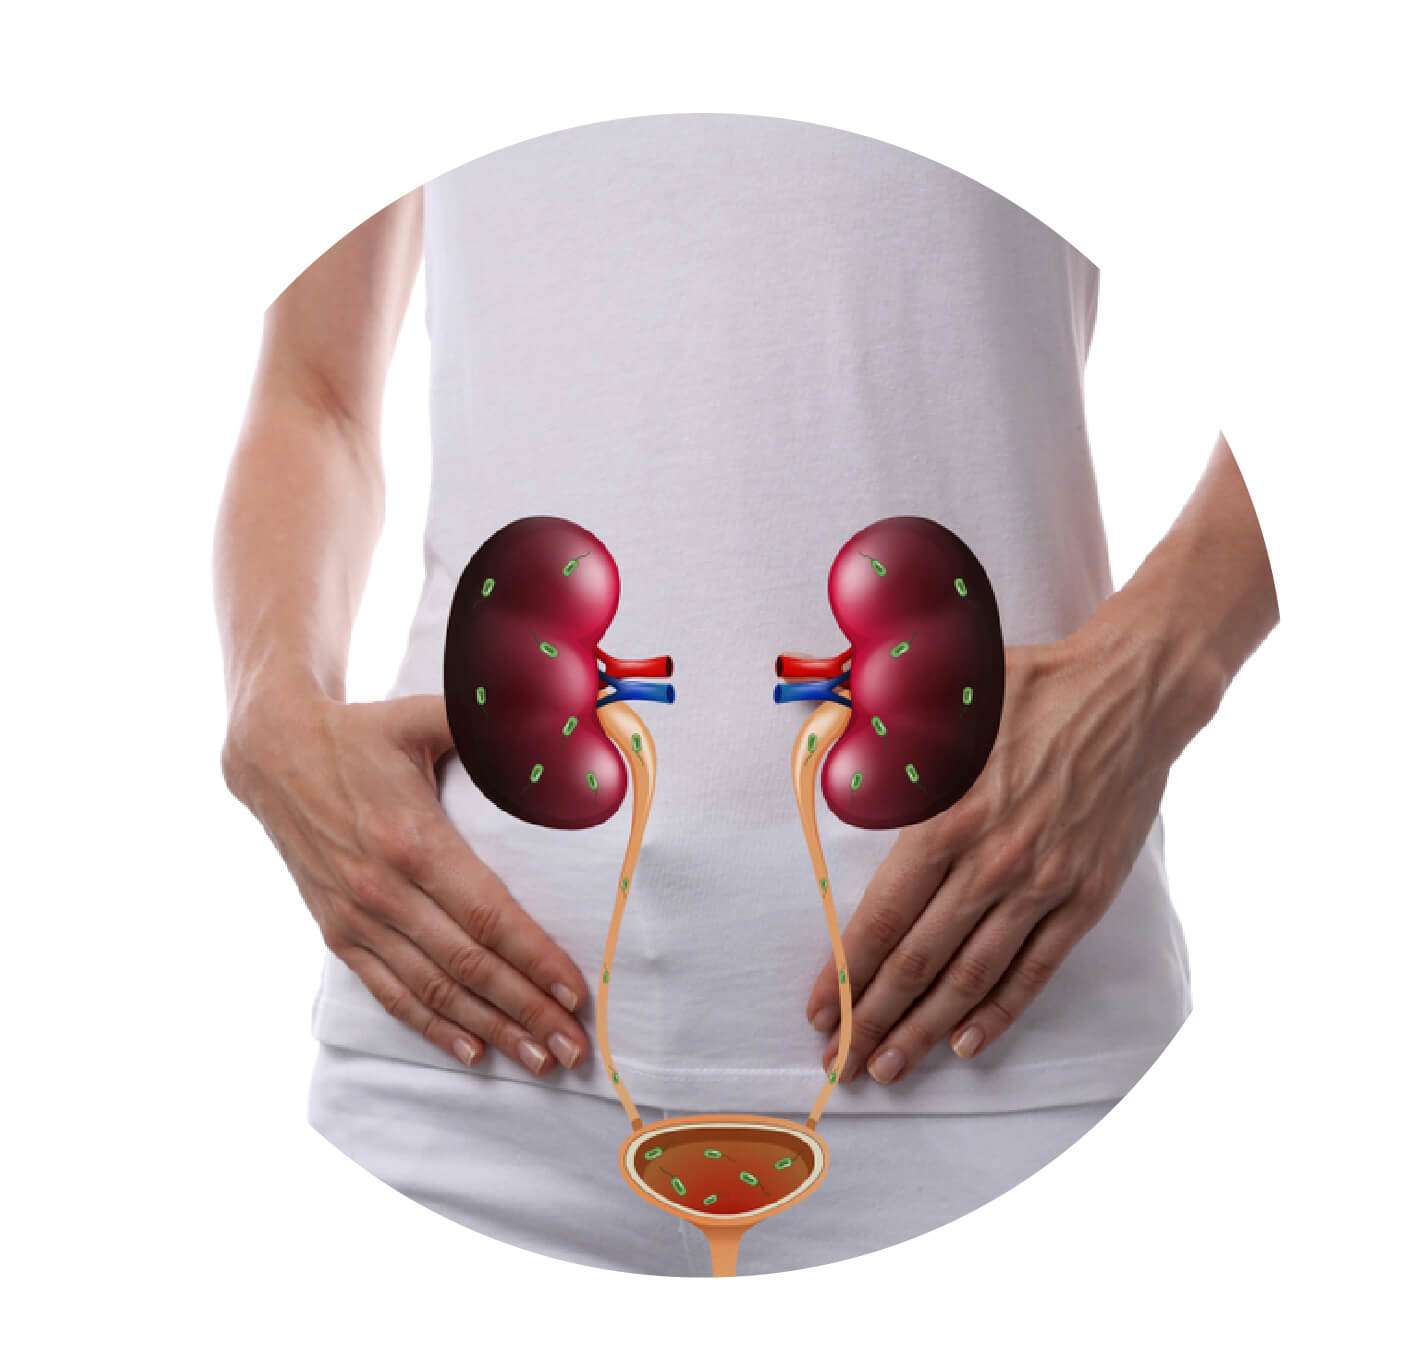 Ayurvedic Treatment for Urinary Tract Problems